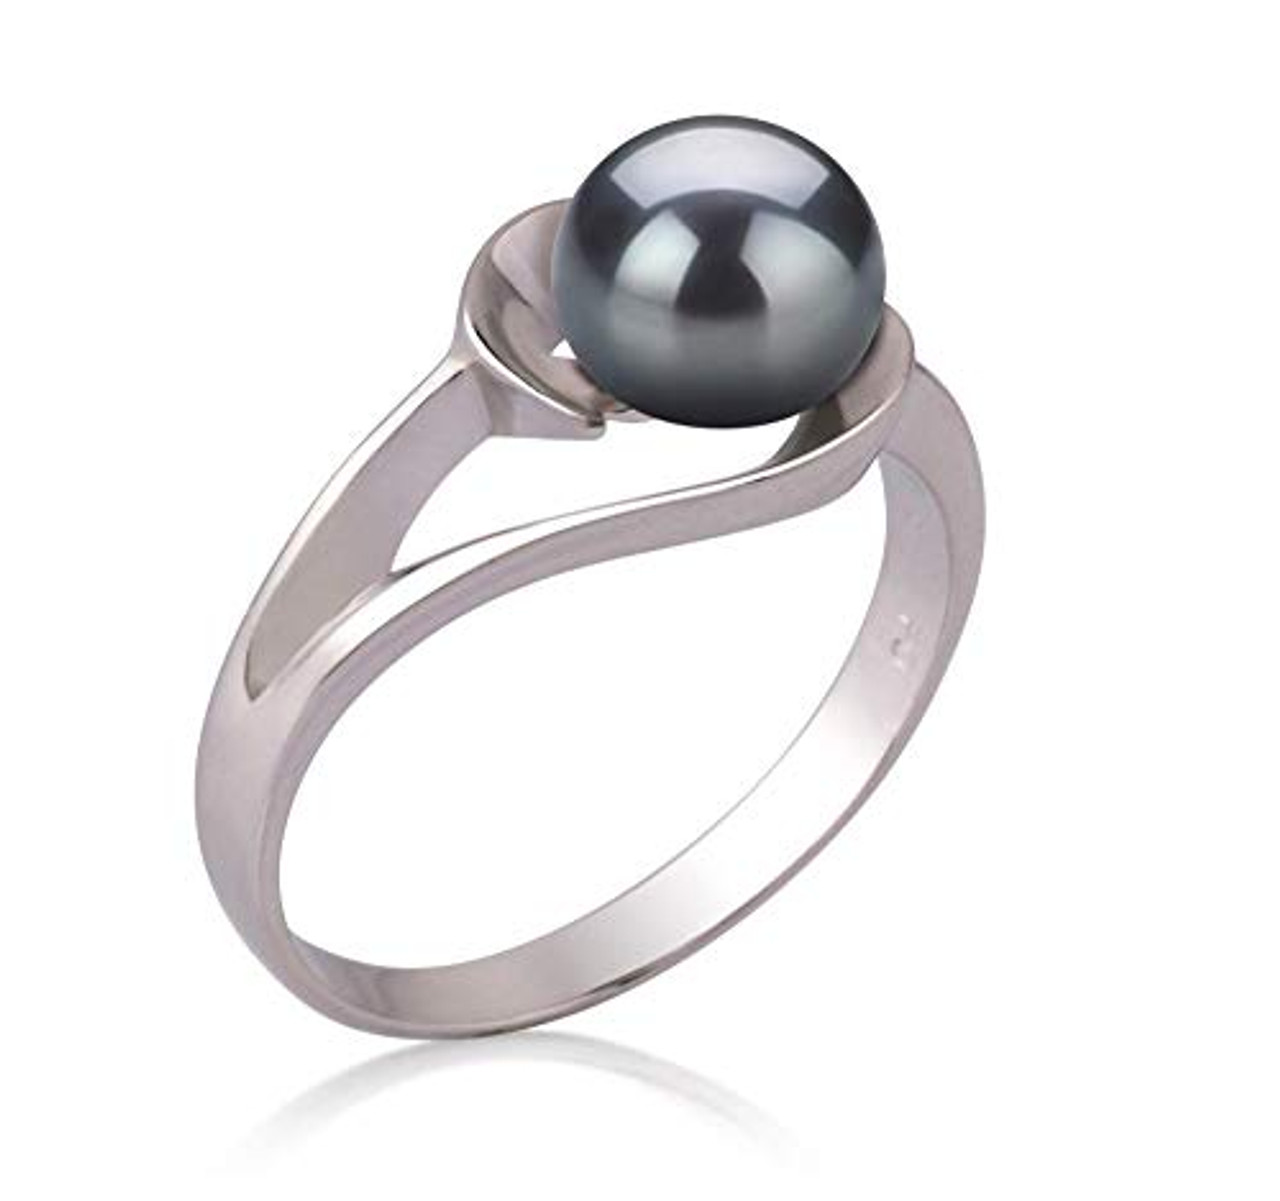 Women's Black Dyed White Pearl Wedding Ring - Genuine Freshwater Cultured Pearl 6-7mm Ring for Women (AAA)